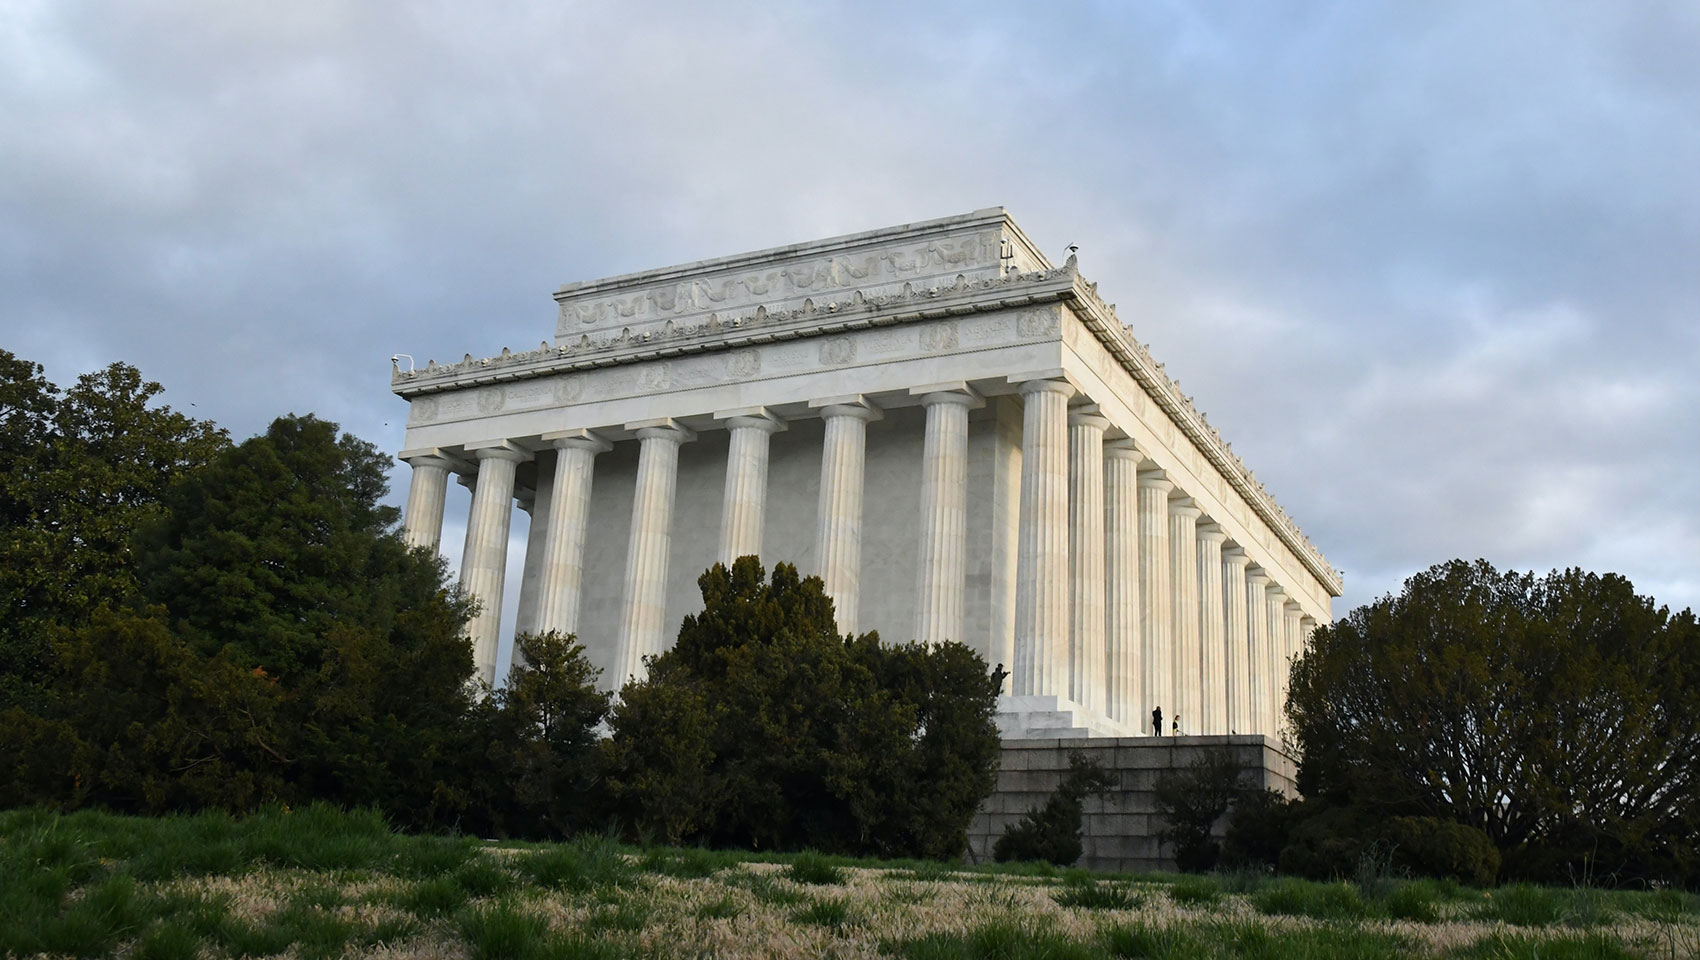 lincoln memorial photo by natalie runnerstrom